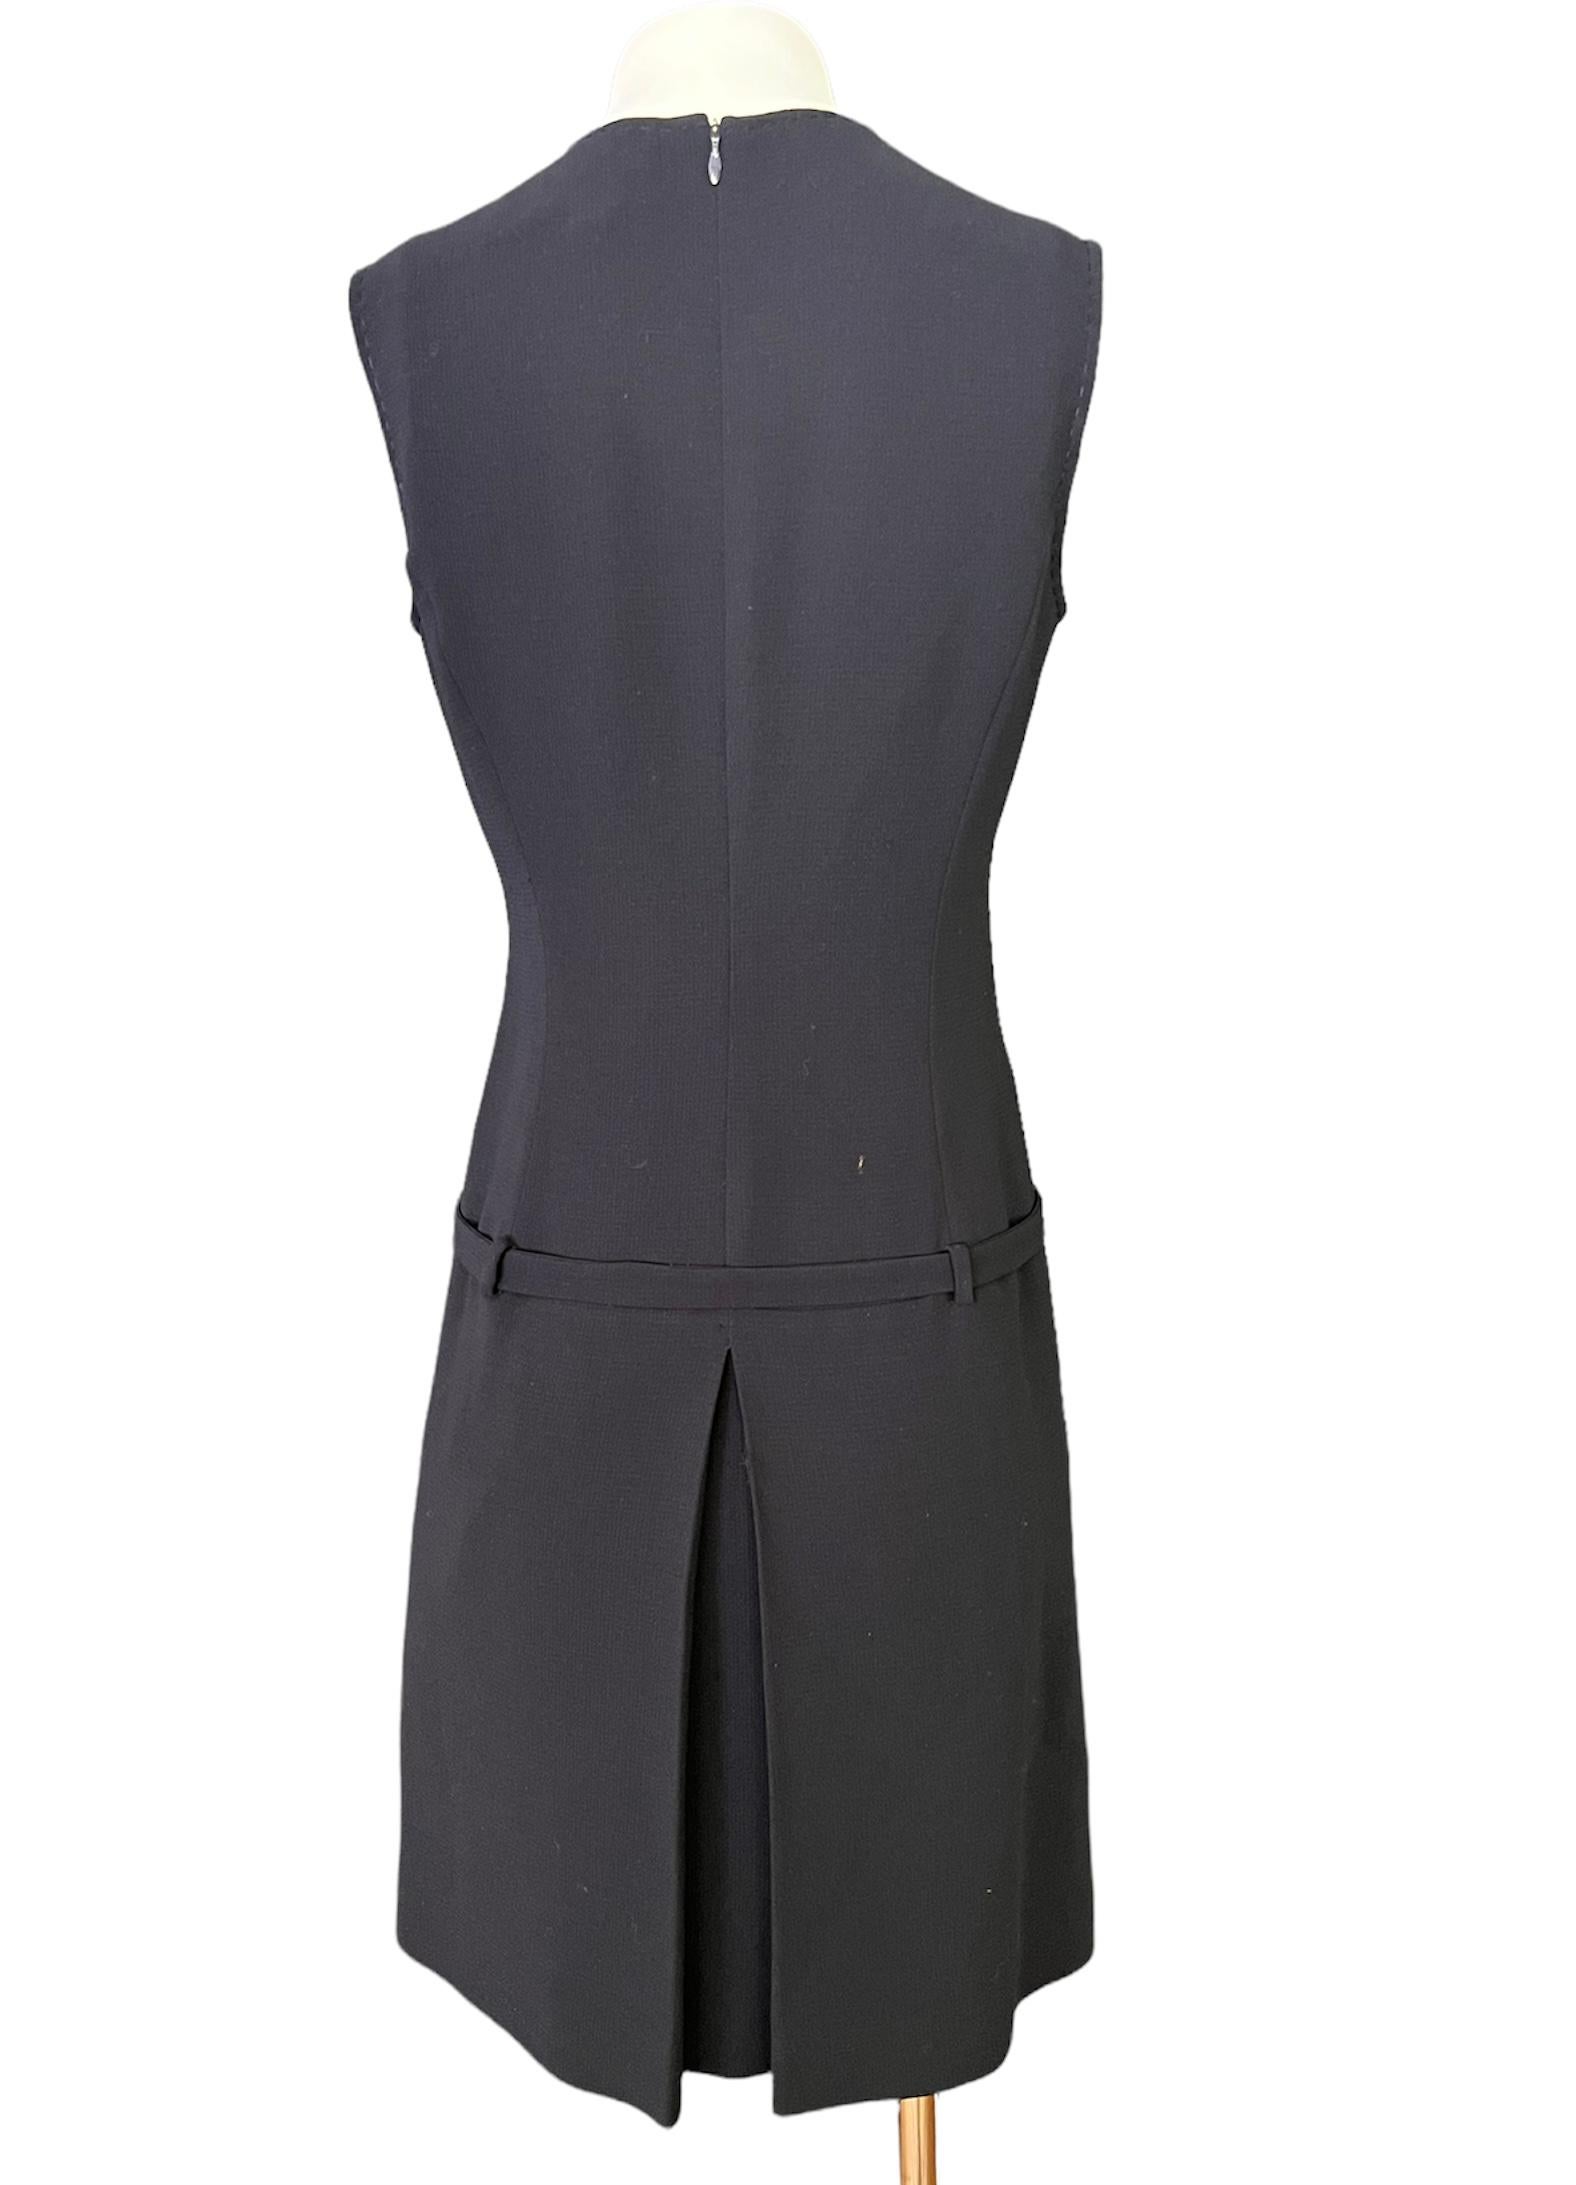 Max Mara Navy Wool Mini Dress, Size 6 In Excellent Condition For Sale In Beverly Hills, CA